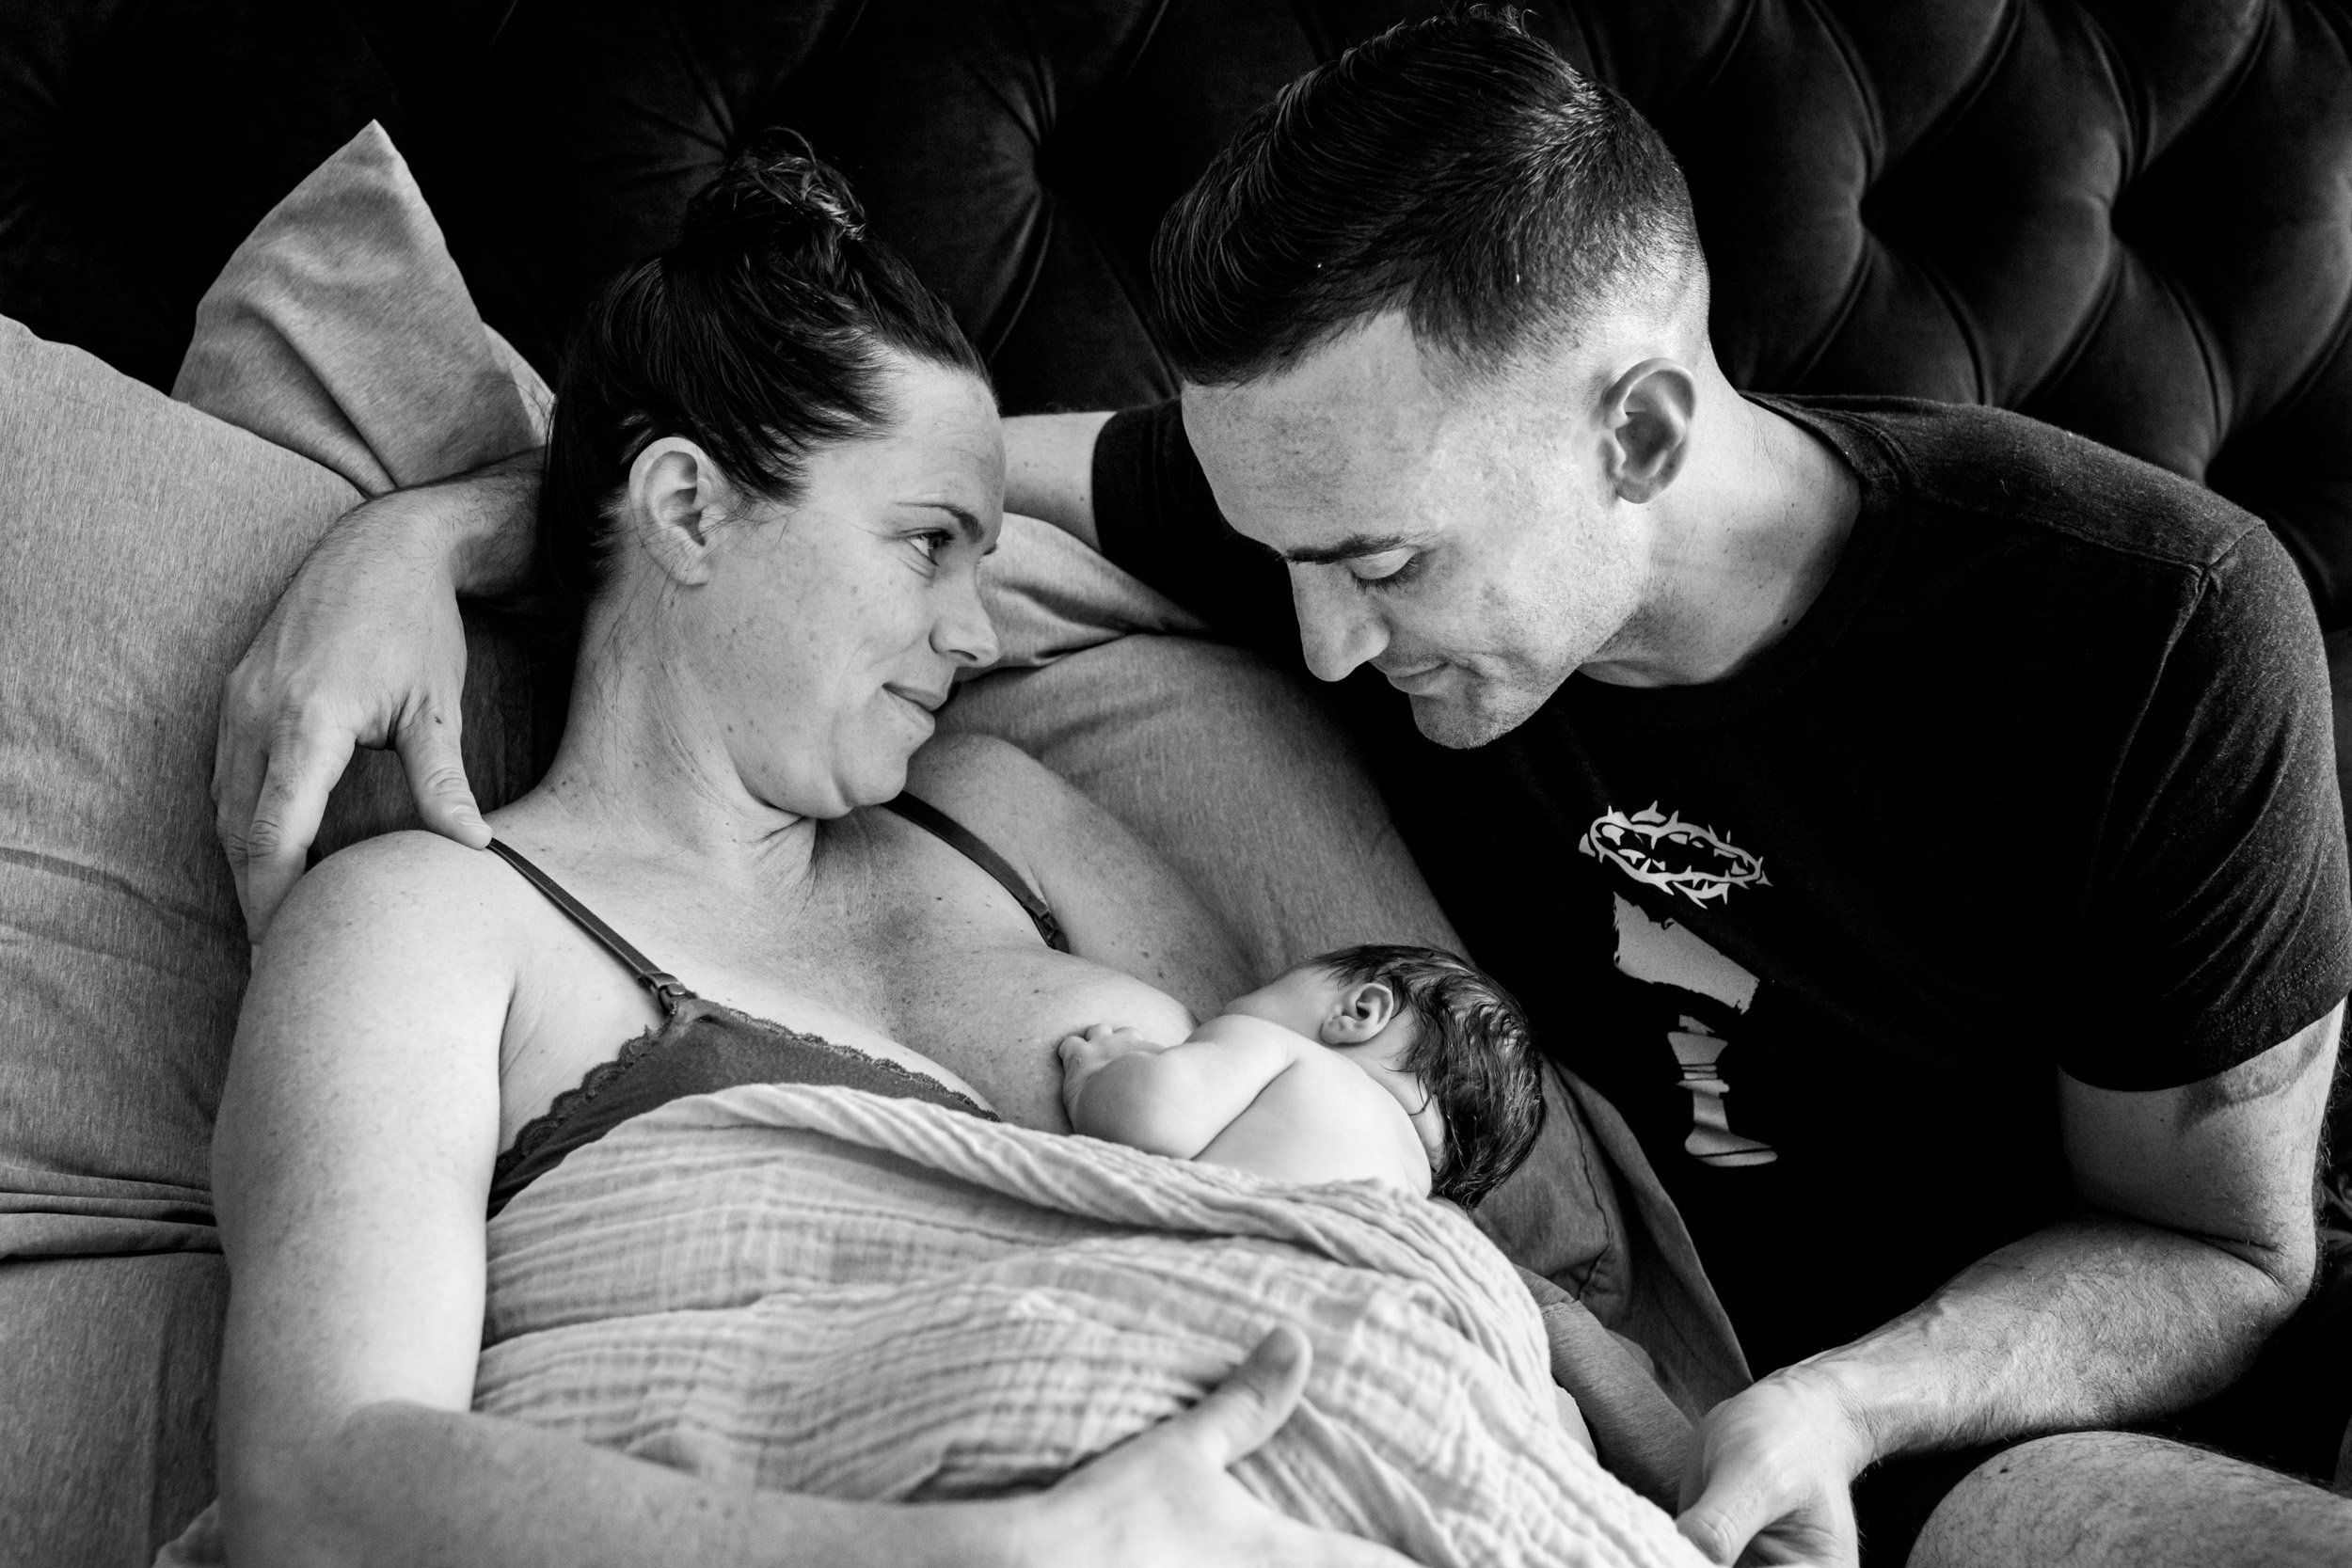 wife looking at her husband lovingly while he looks at their newborn baby girl just after birth